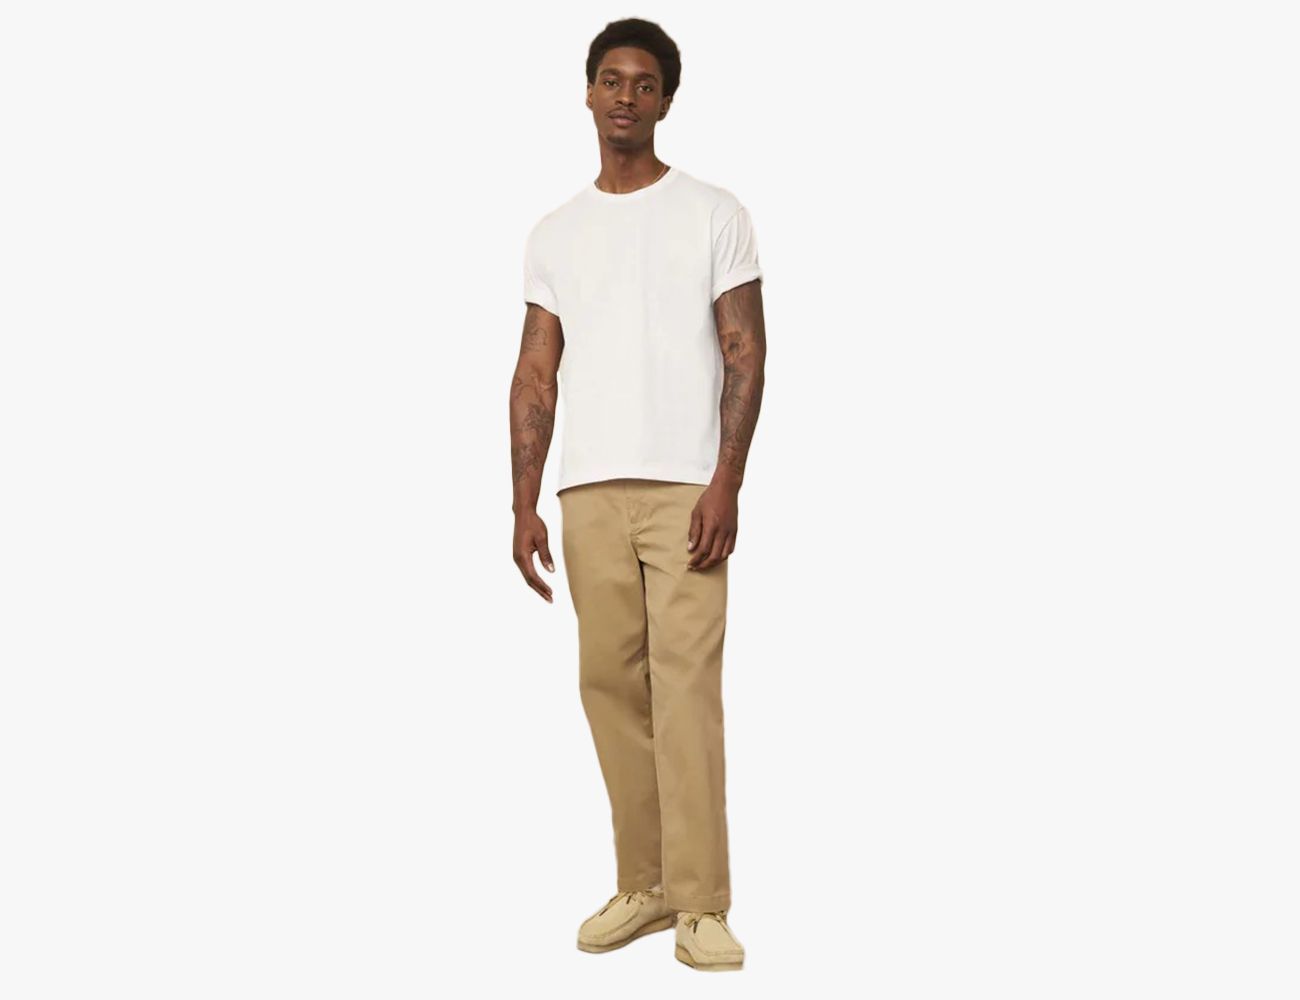 wol Verward voorwoord These New Dockers Chinos Are a Must-Buy, and They're American-Made